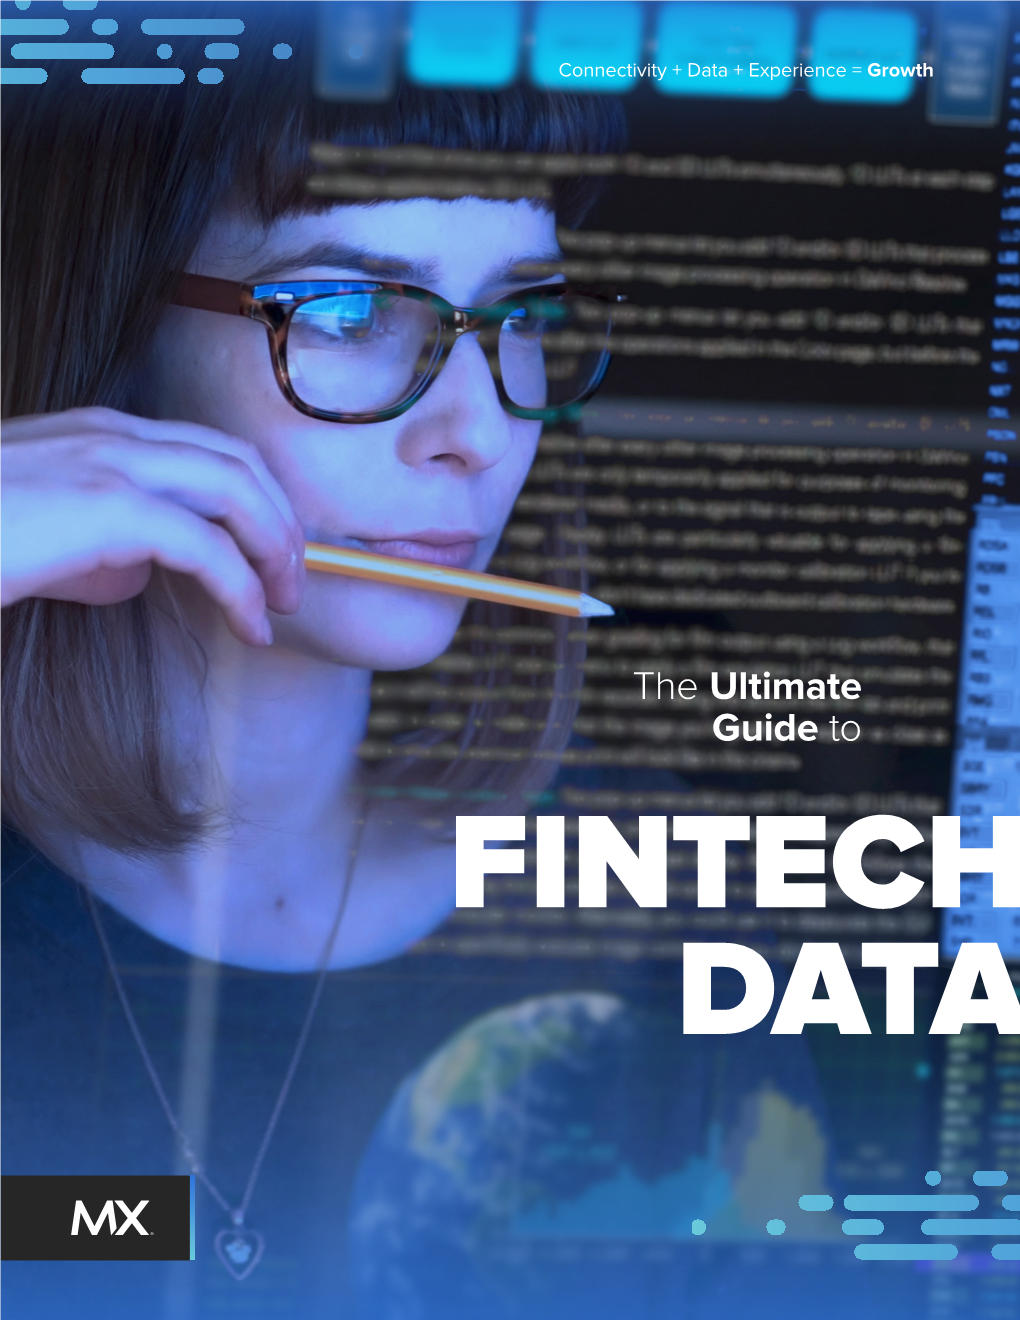 The Ultimate Guide to FINTECH DATA